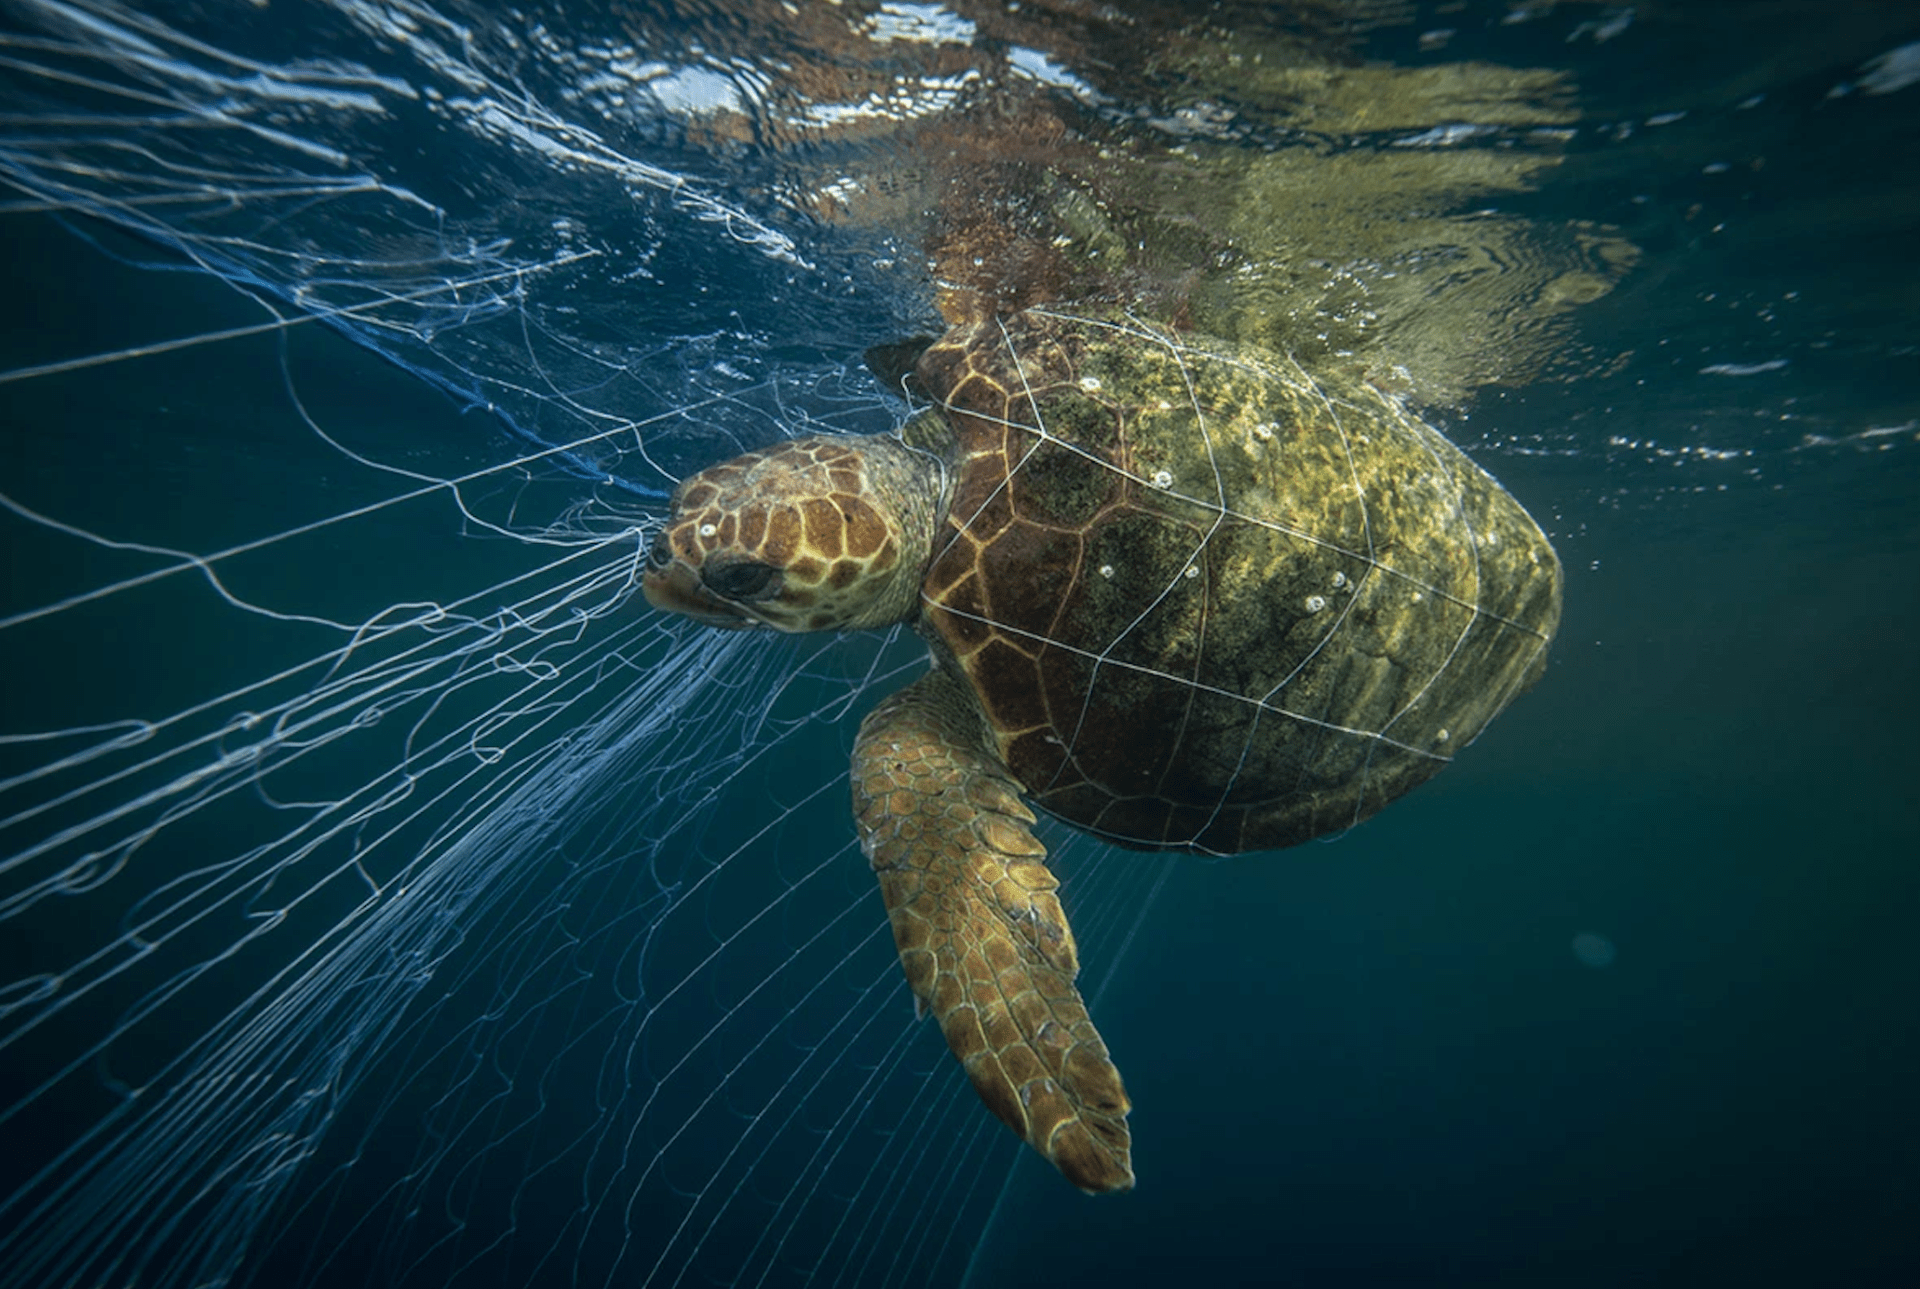 Forecast warns when sea life will get tangled in nets — one year in advance